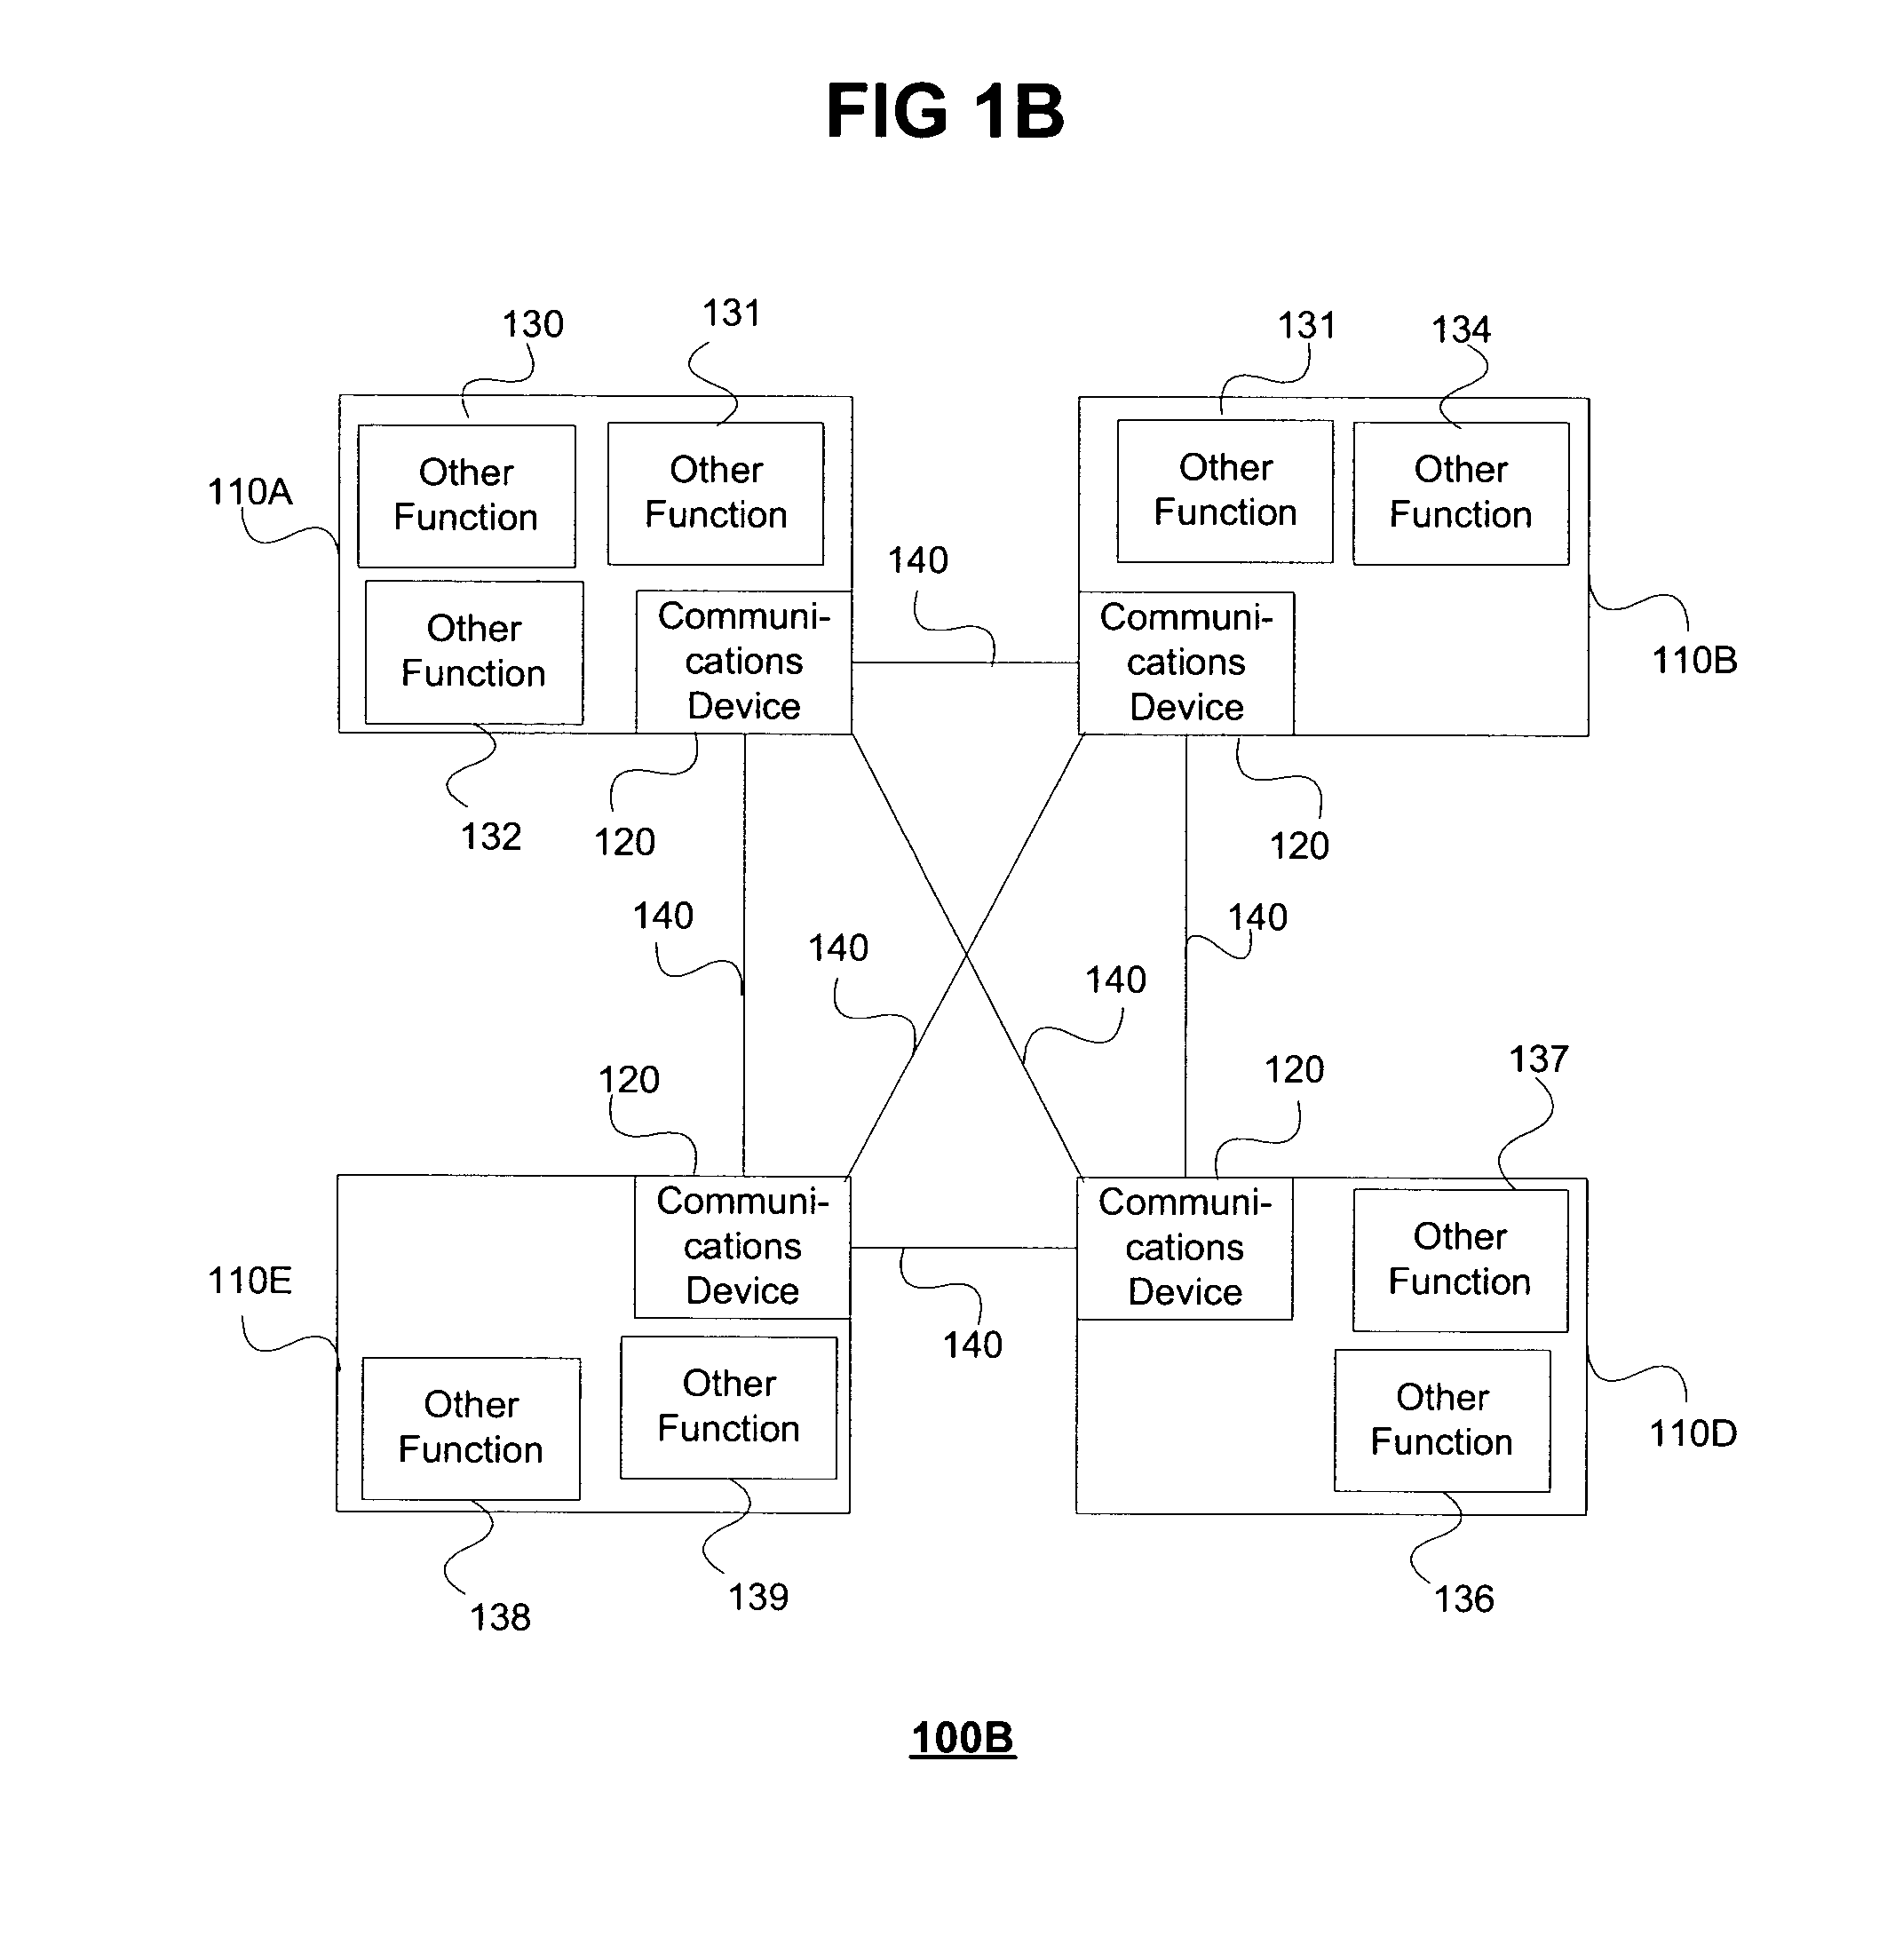 Modular personal network systems and methods